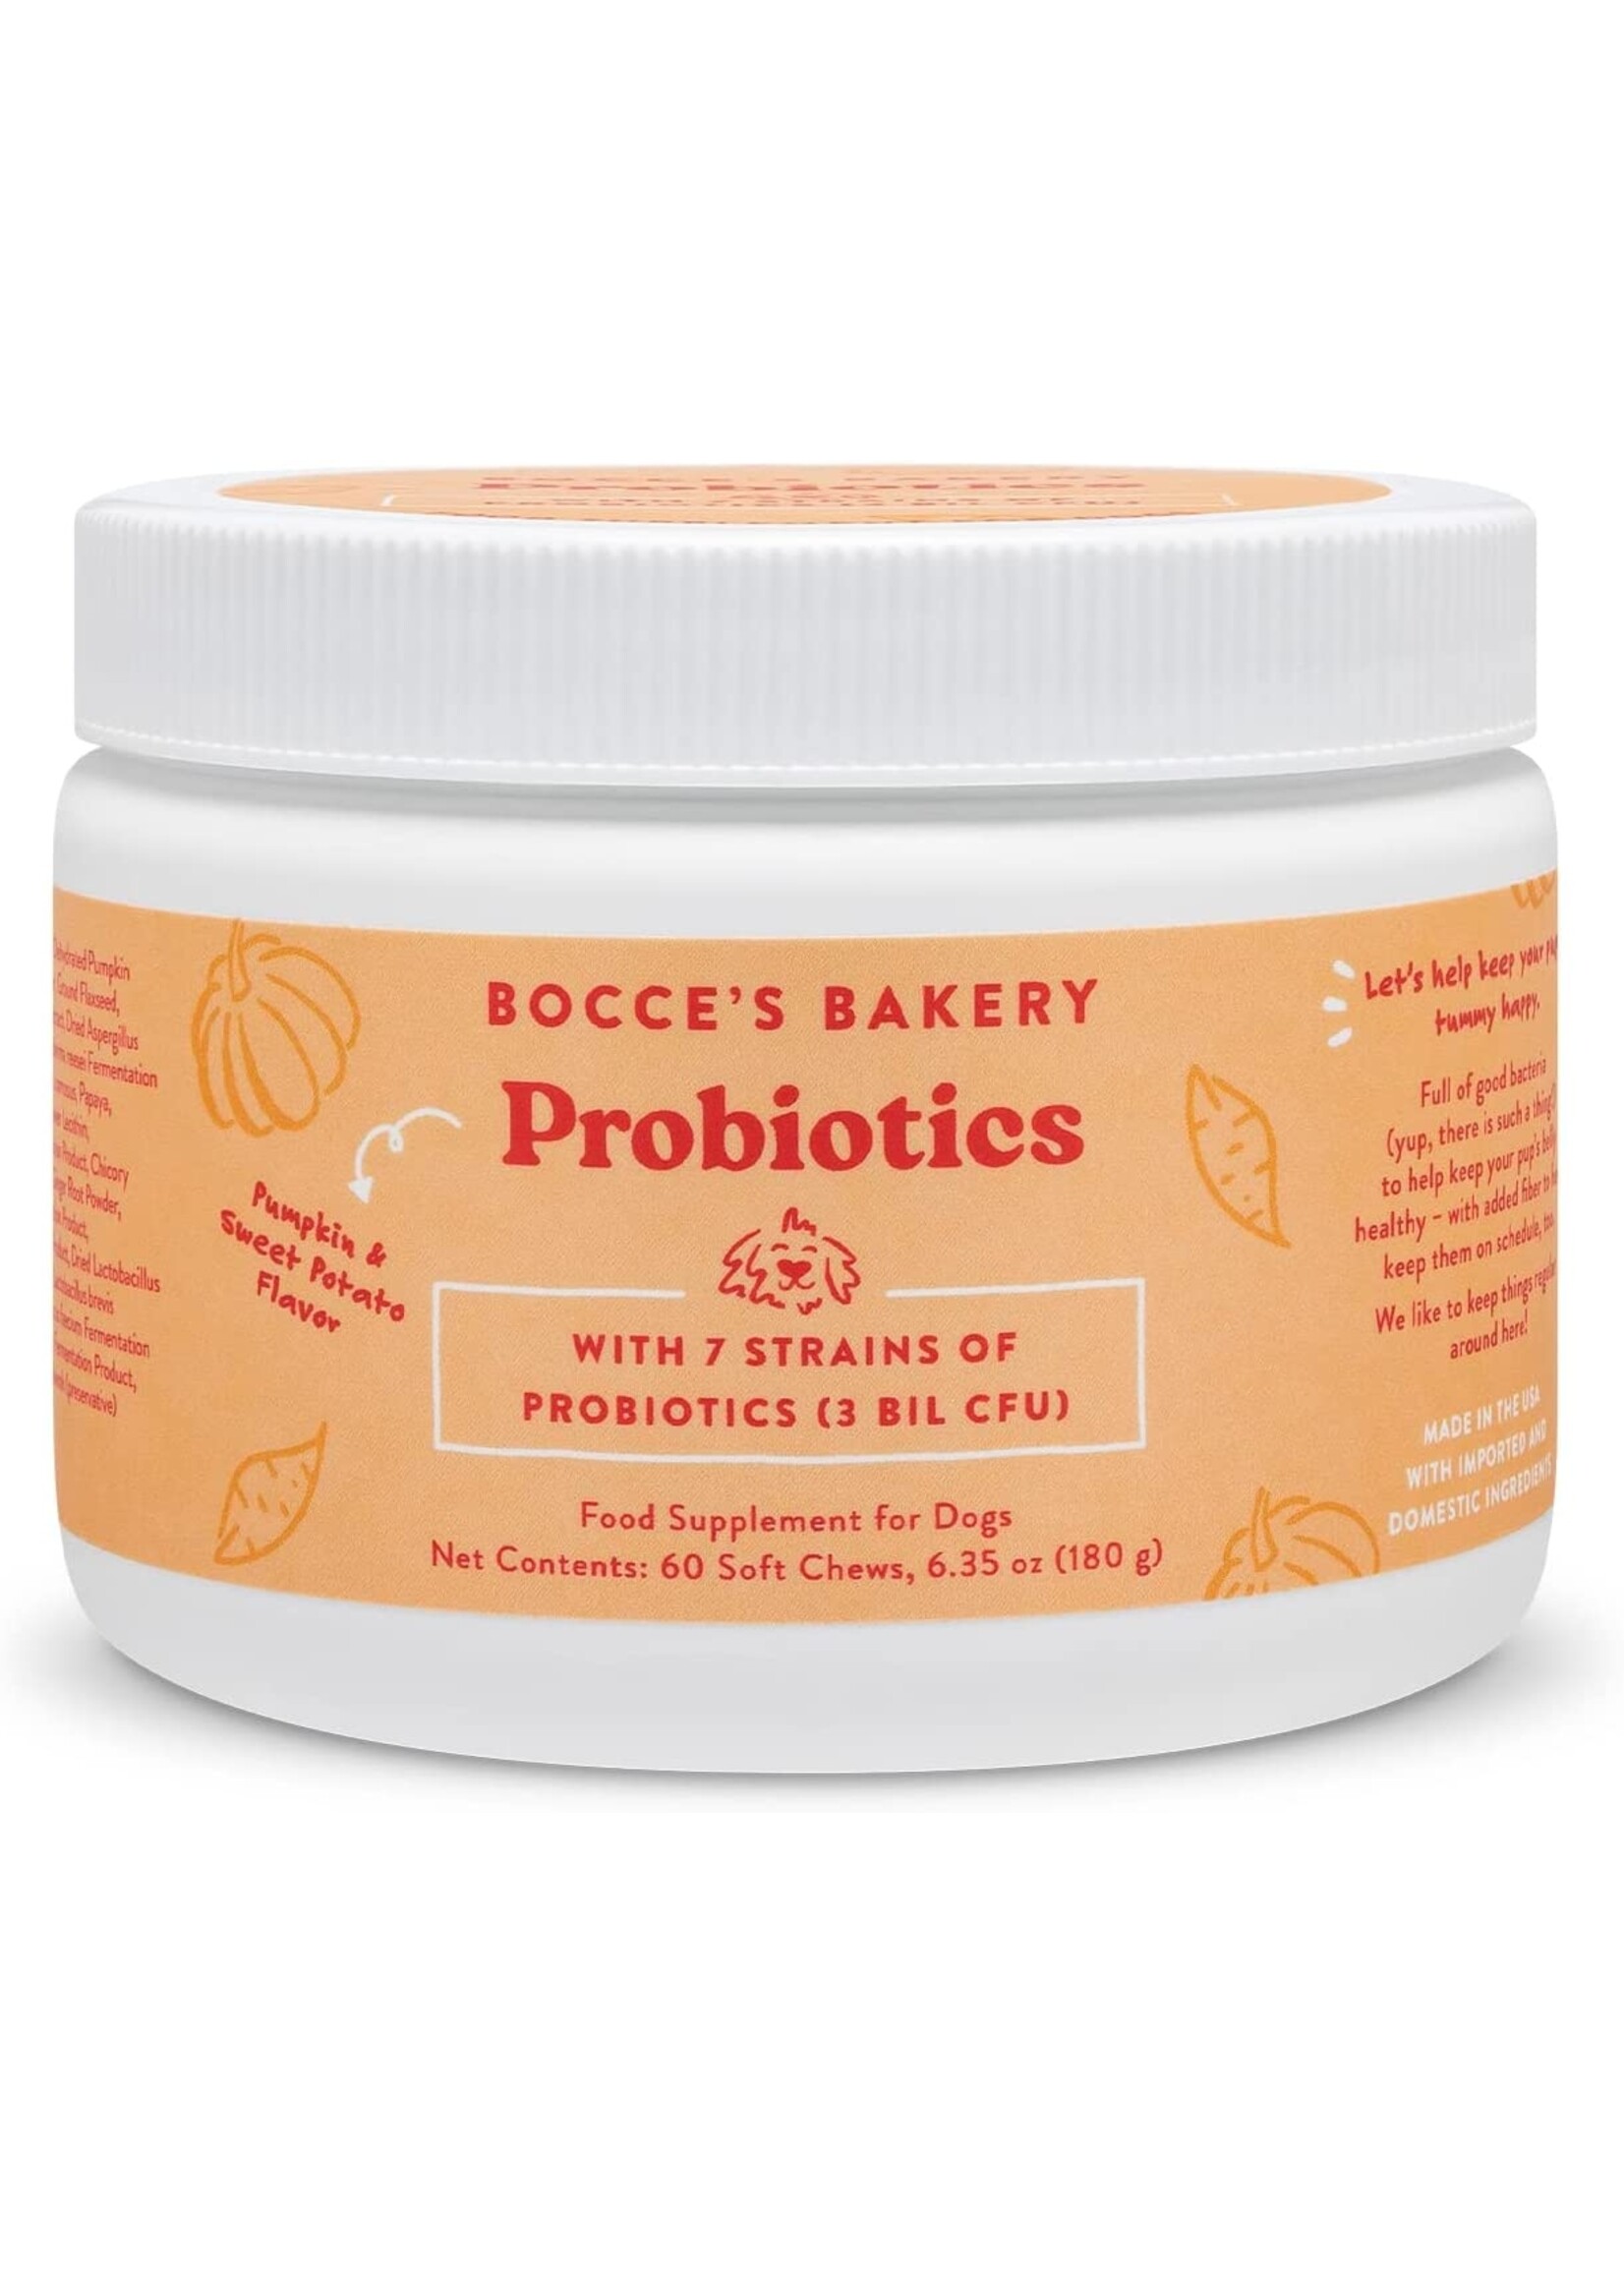 Bocce's Bakery Bocce's Bakery Probiotic Dog Supplement 6.35oz